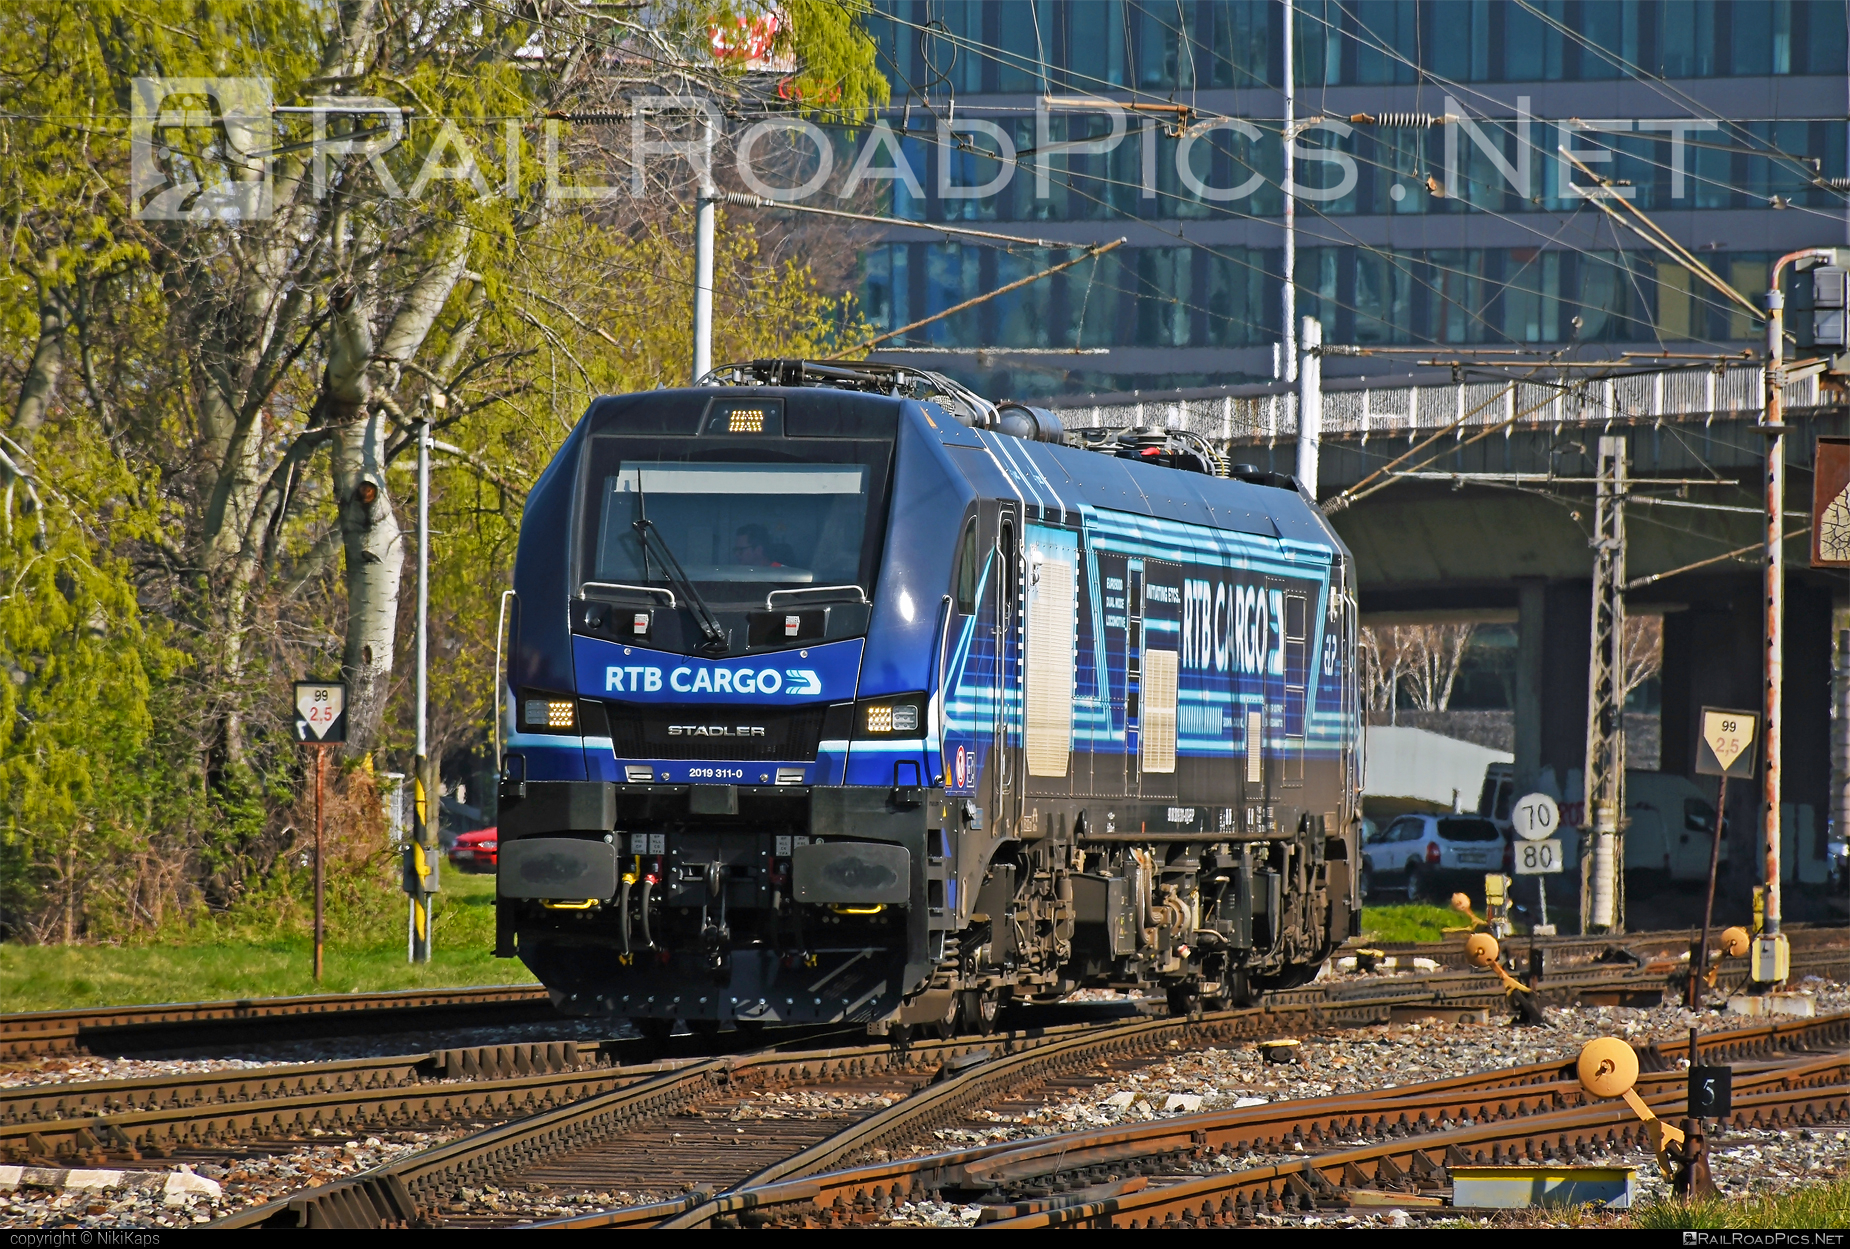 Stadler EURO9000 - 2019 311-0 operated by RTB Cargo GmbH #elp #euro9000 #europeanLocPool #europeanLocPoolAG #rtb #rtbcargo #stadler #stadlerEuro #stadlerEuro9000 #stadlerrail #stadlerrailag